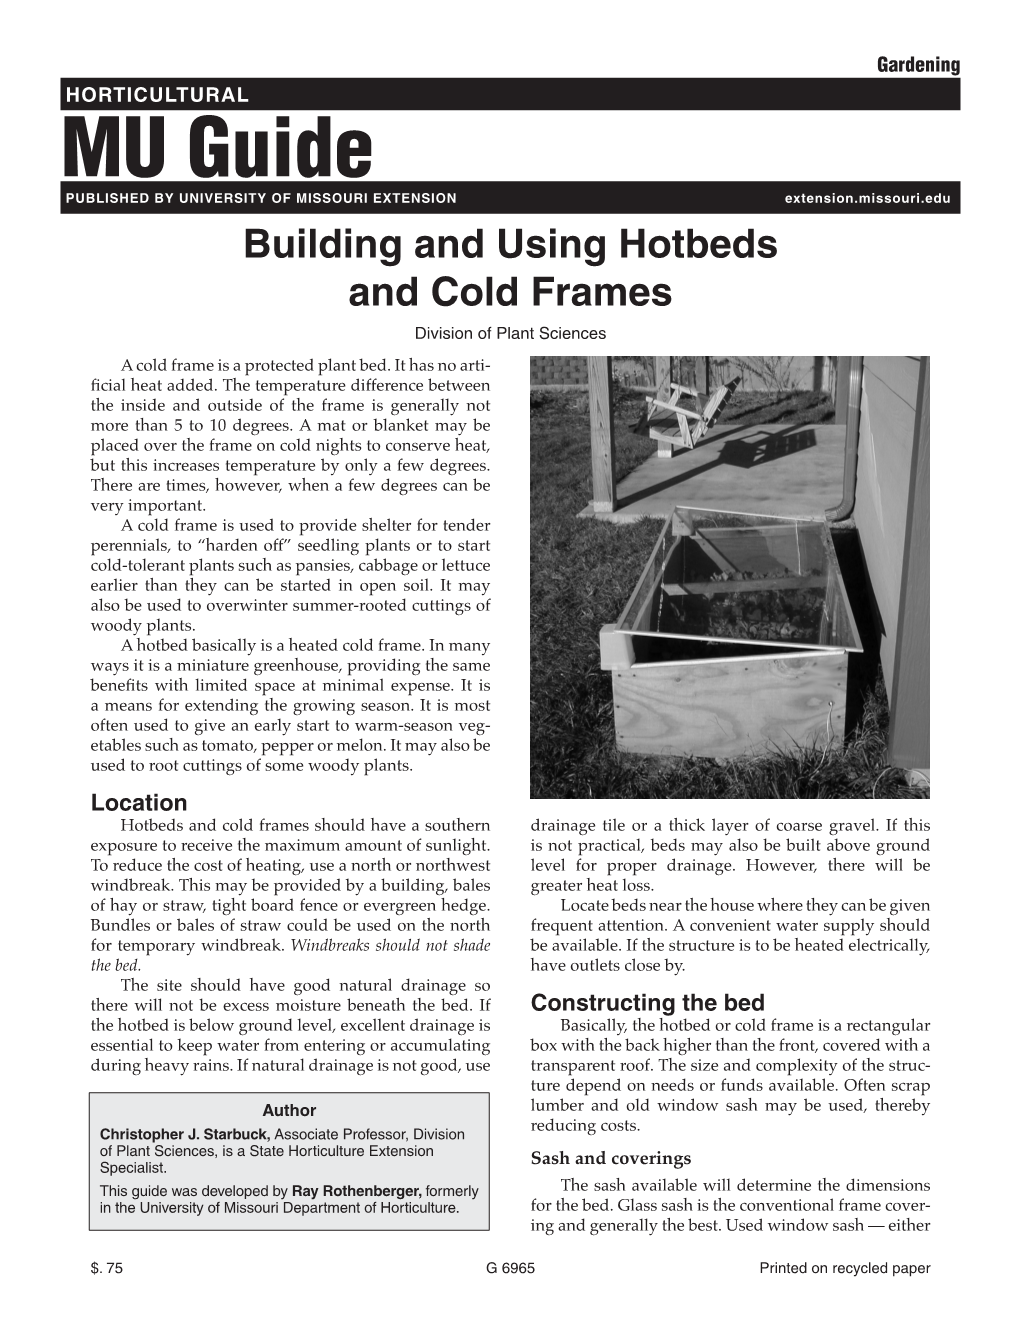 MU Guide PUBLISHED by UNIVERSITY of MISSOURI EXTENSION Extension.Missouri.Edu Building and Using Hotbeds and Cold Frames Division of Plant Sciences